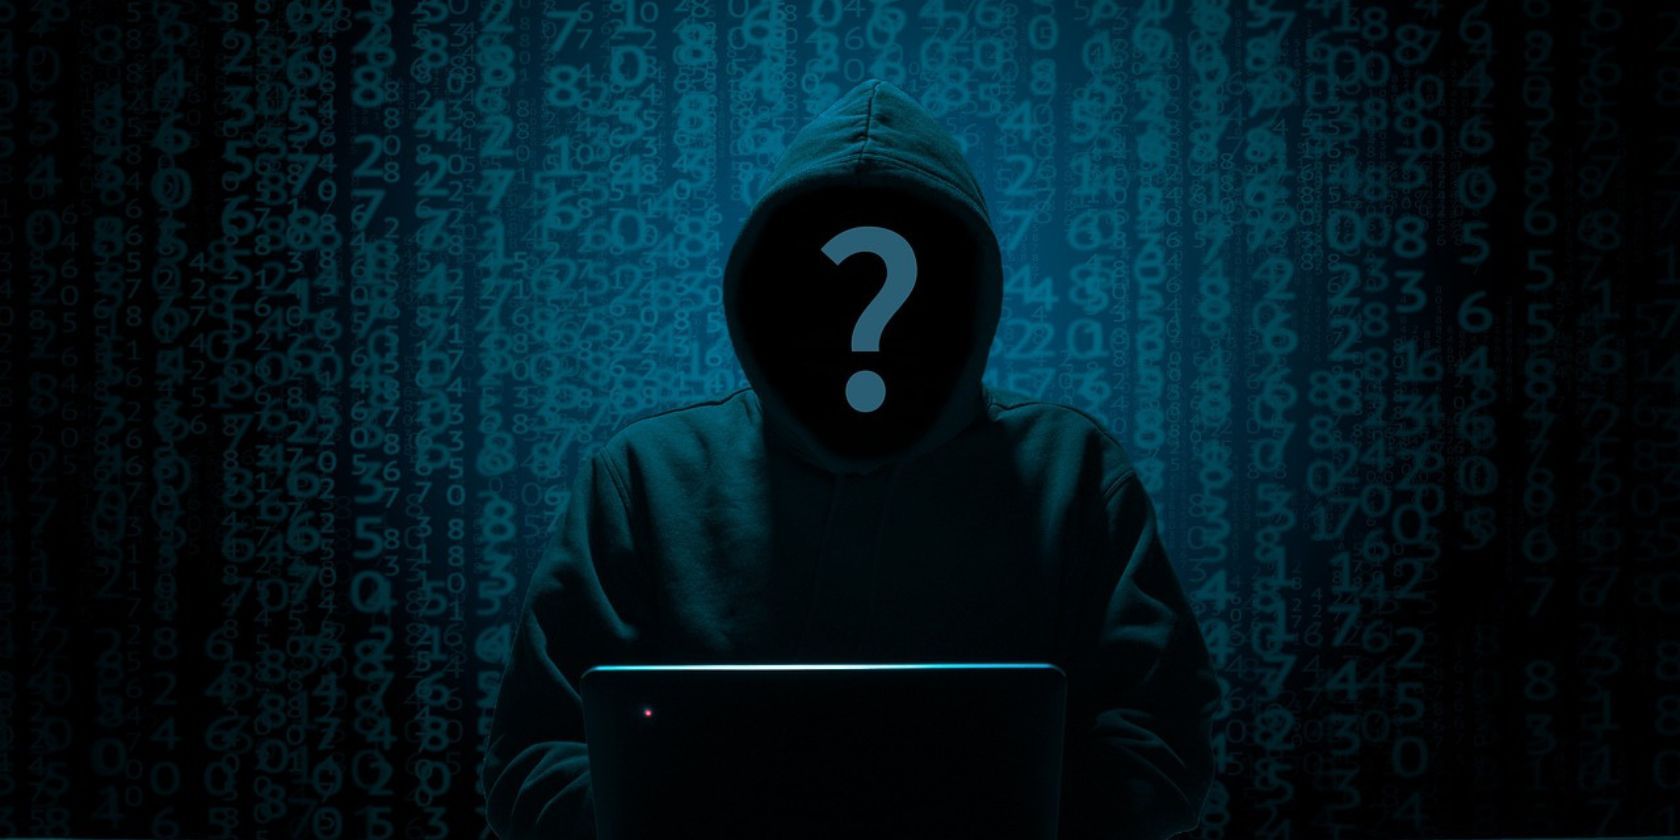 A hooded person sat in front of a laptop with code behind it